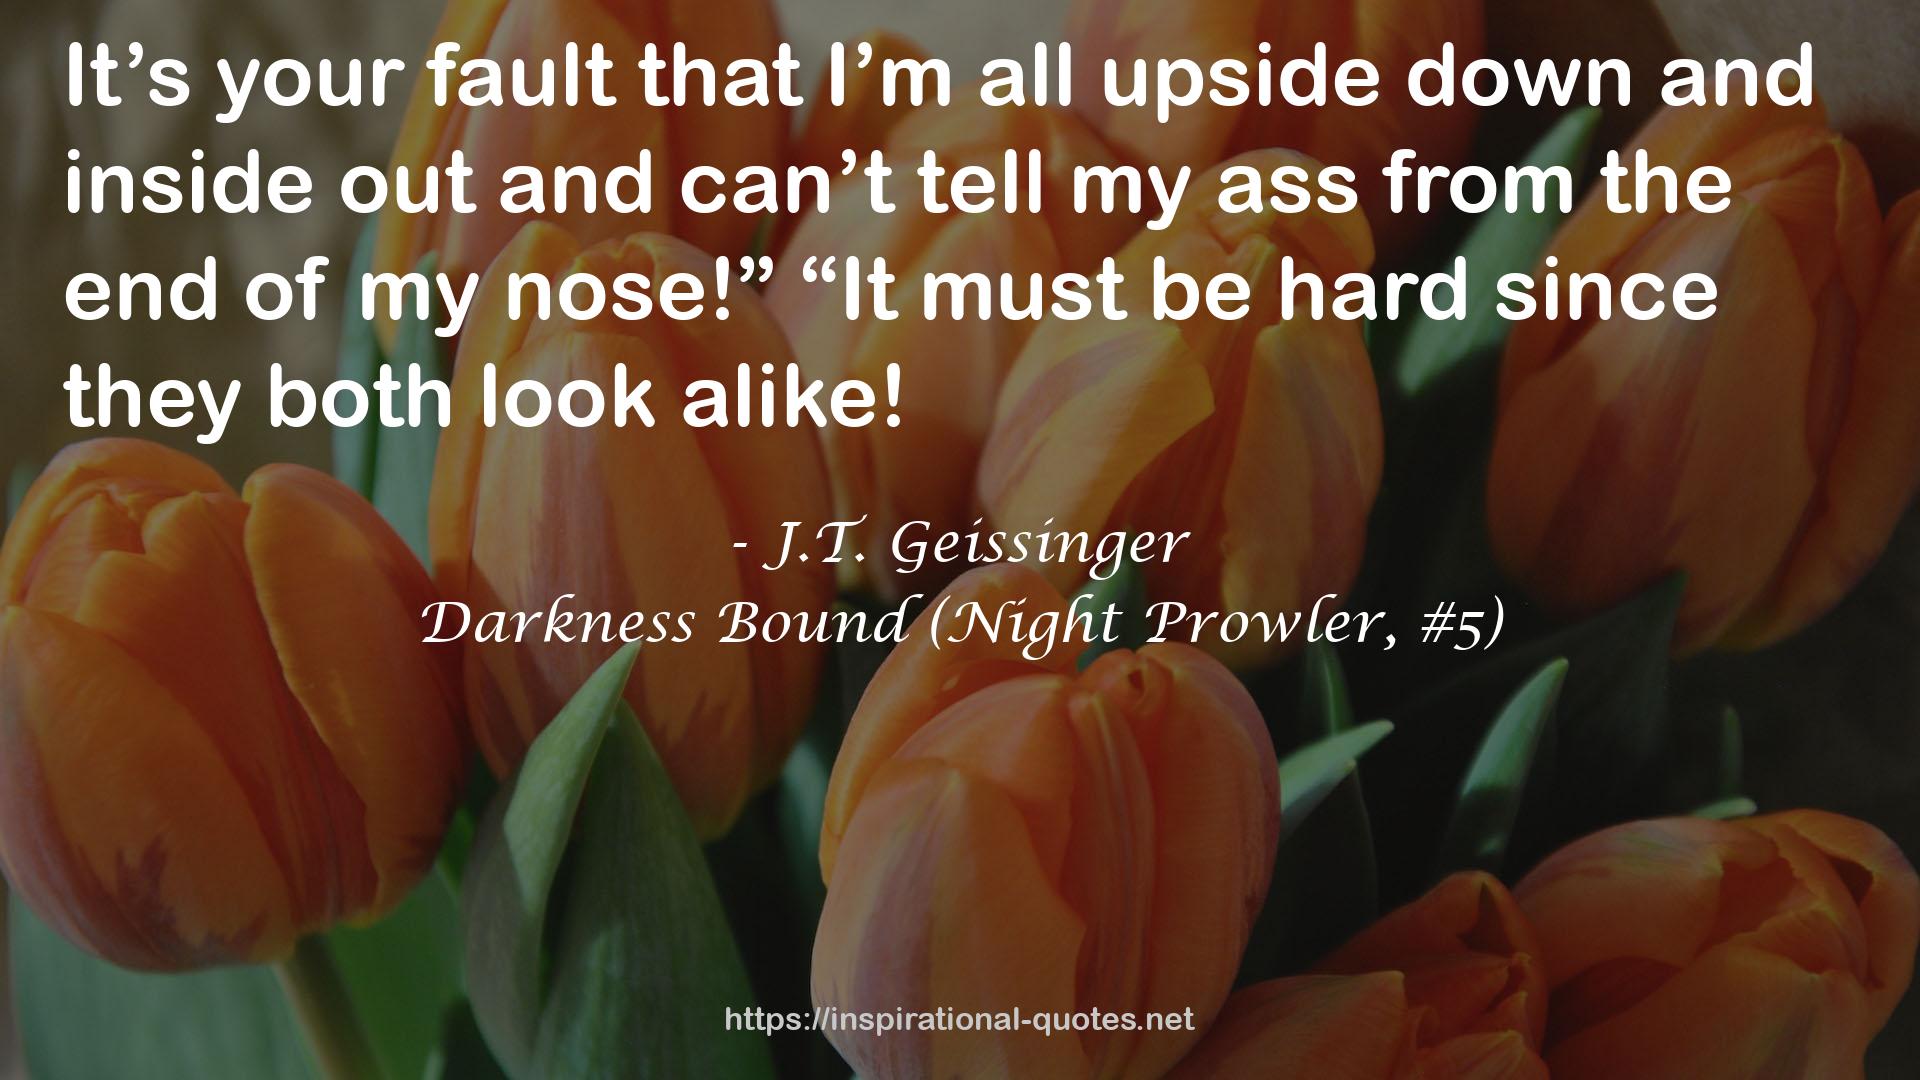 Darkness Bound (Night Prowler, #5) QUOTES